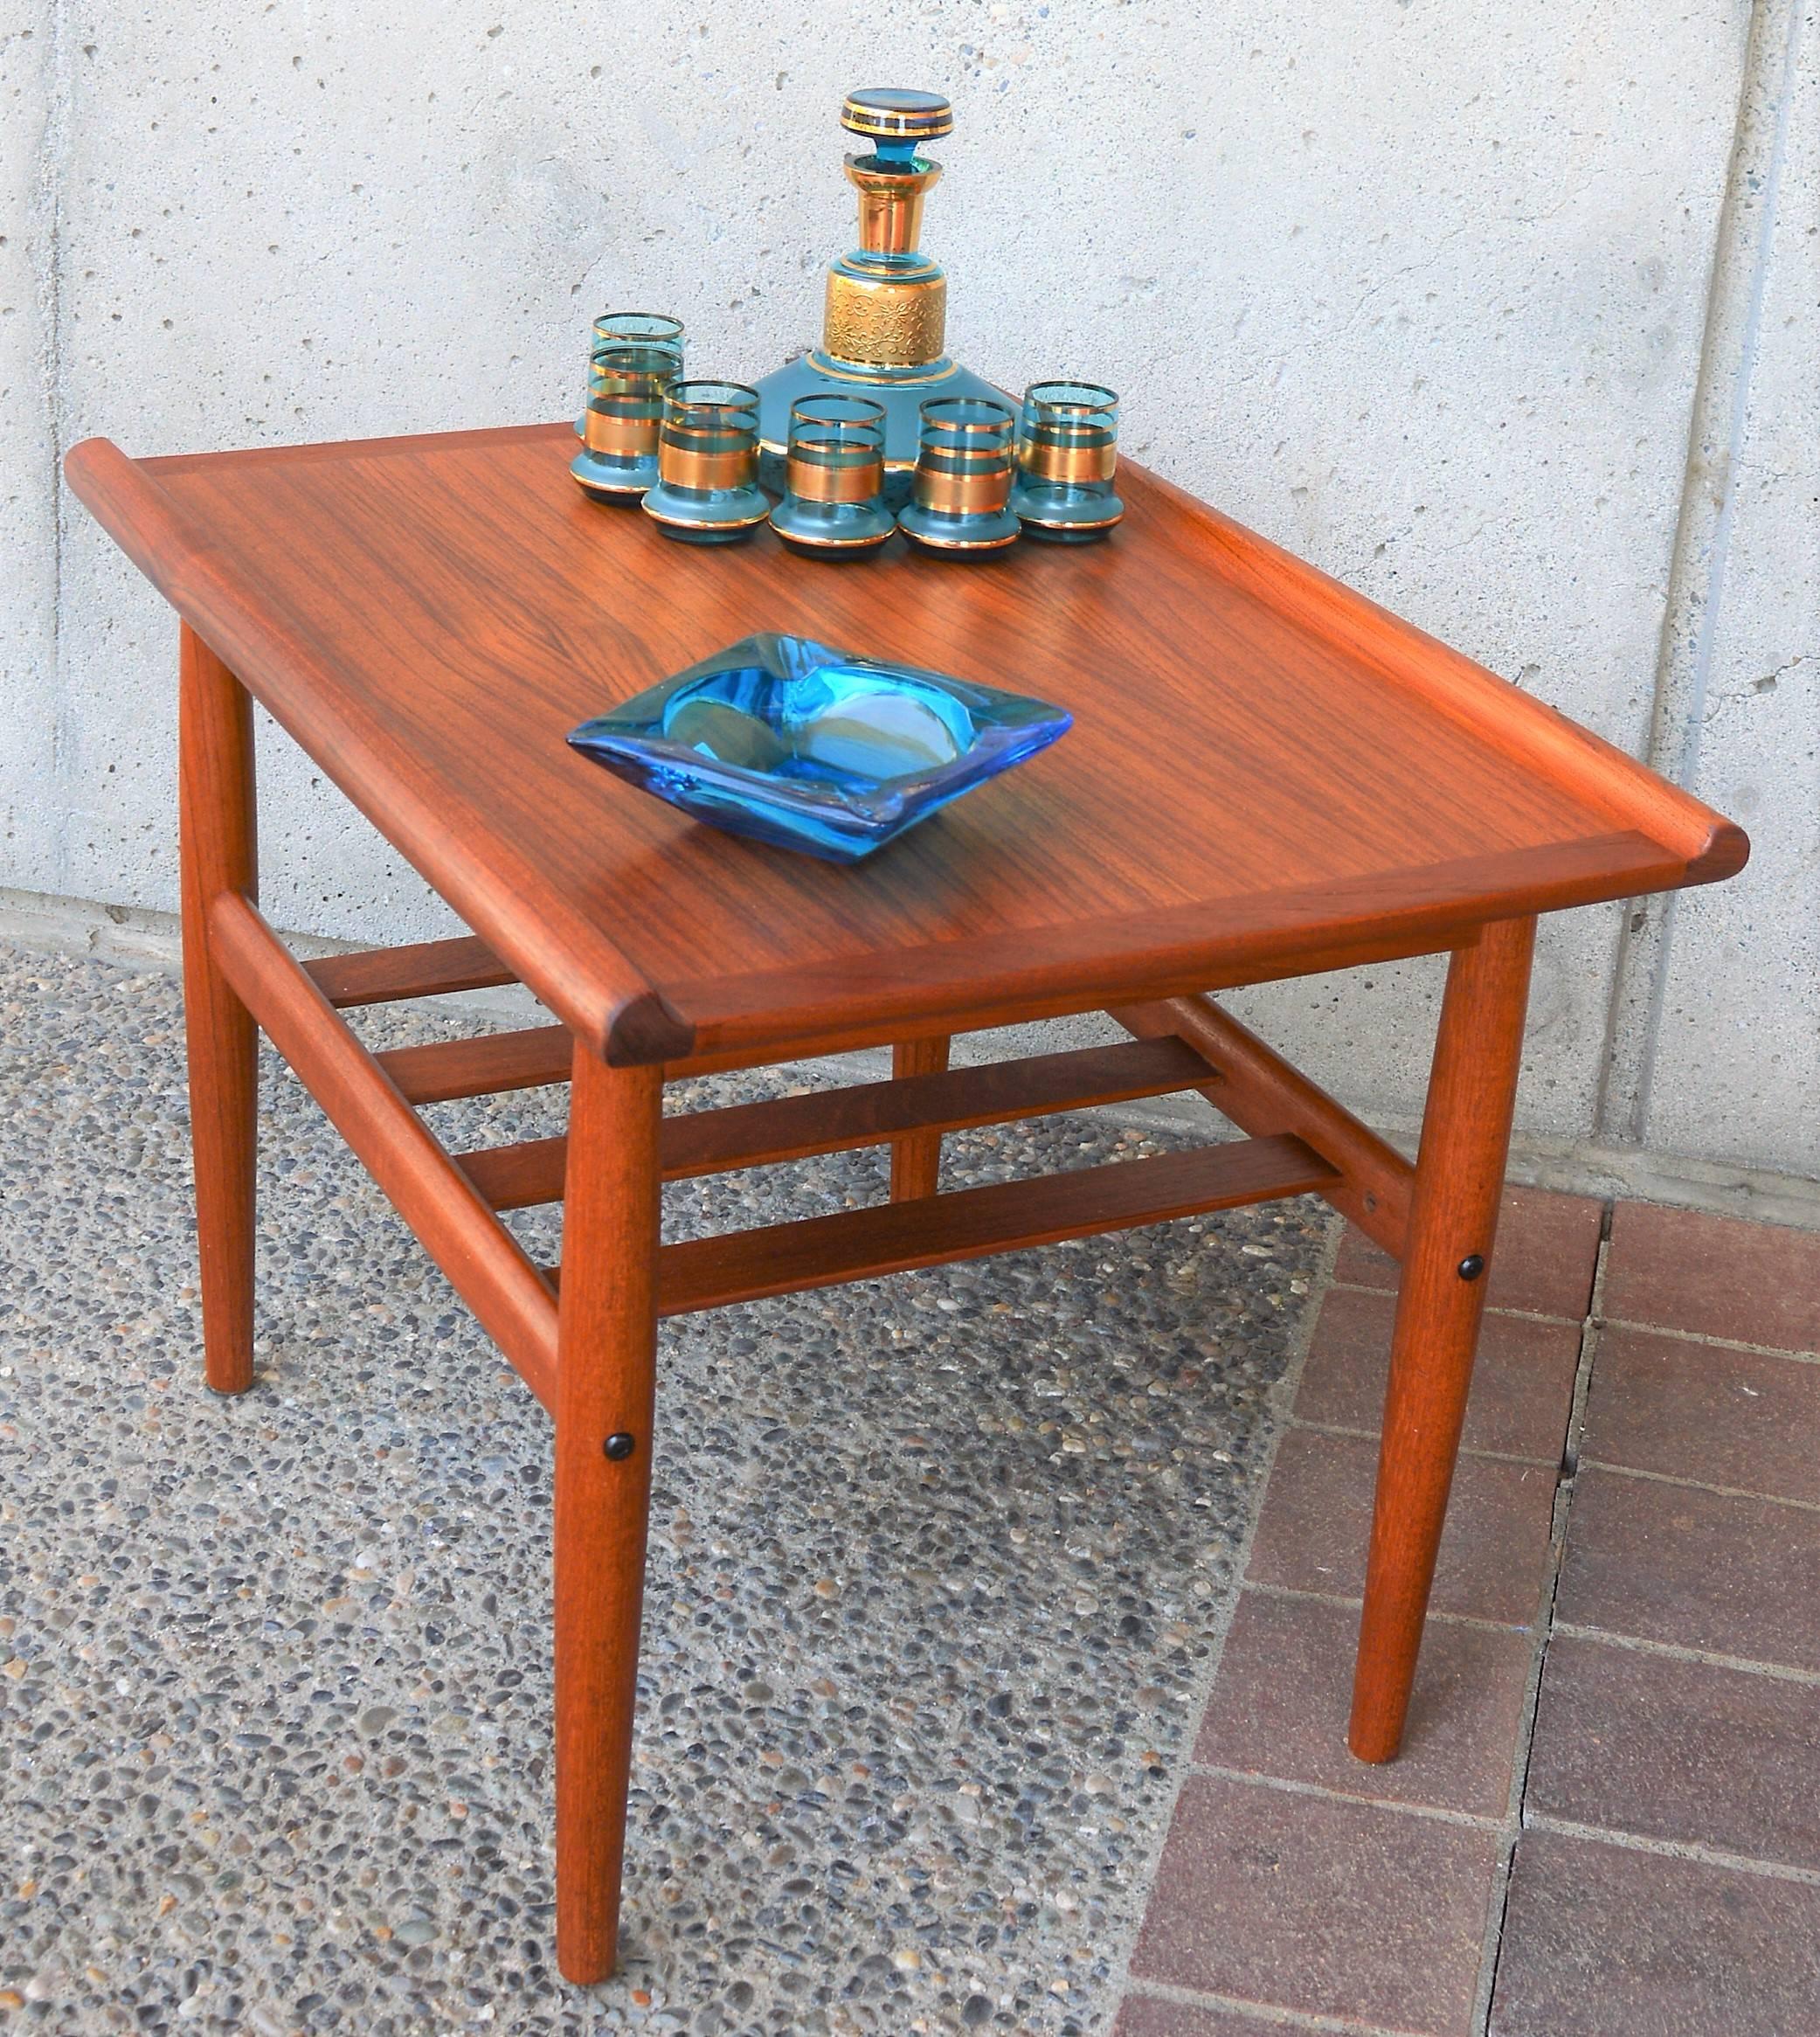 This sweet Danish modern teak side table is in the style of Grete Jalk, with the sultry flared top edges, classic conical legs, beautiful grain and lower slat shelf. In gorgeous condition and freshly oiled.